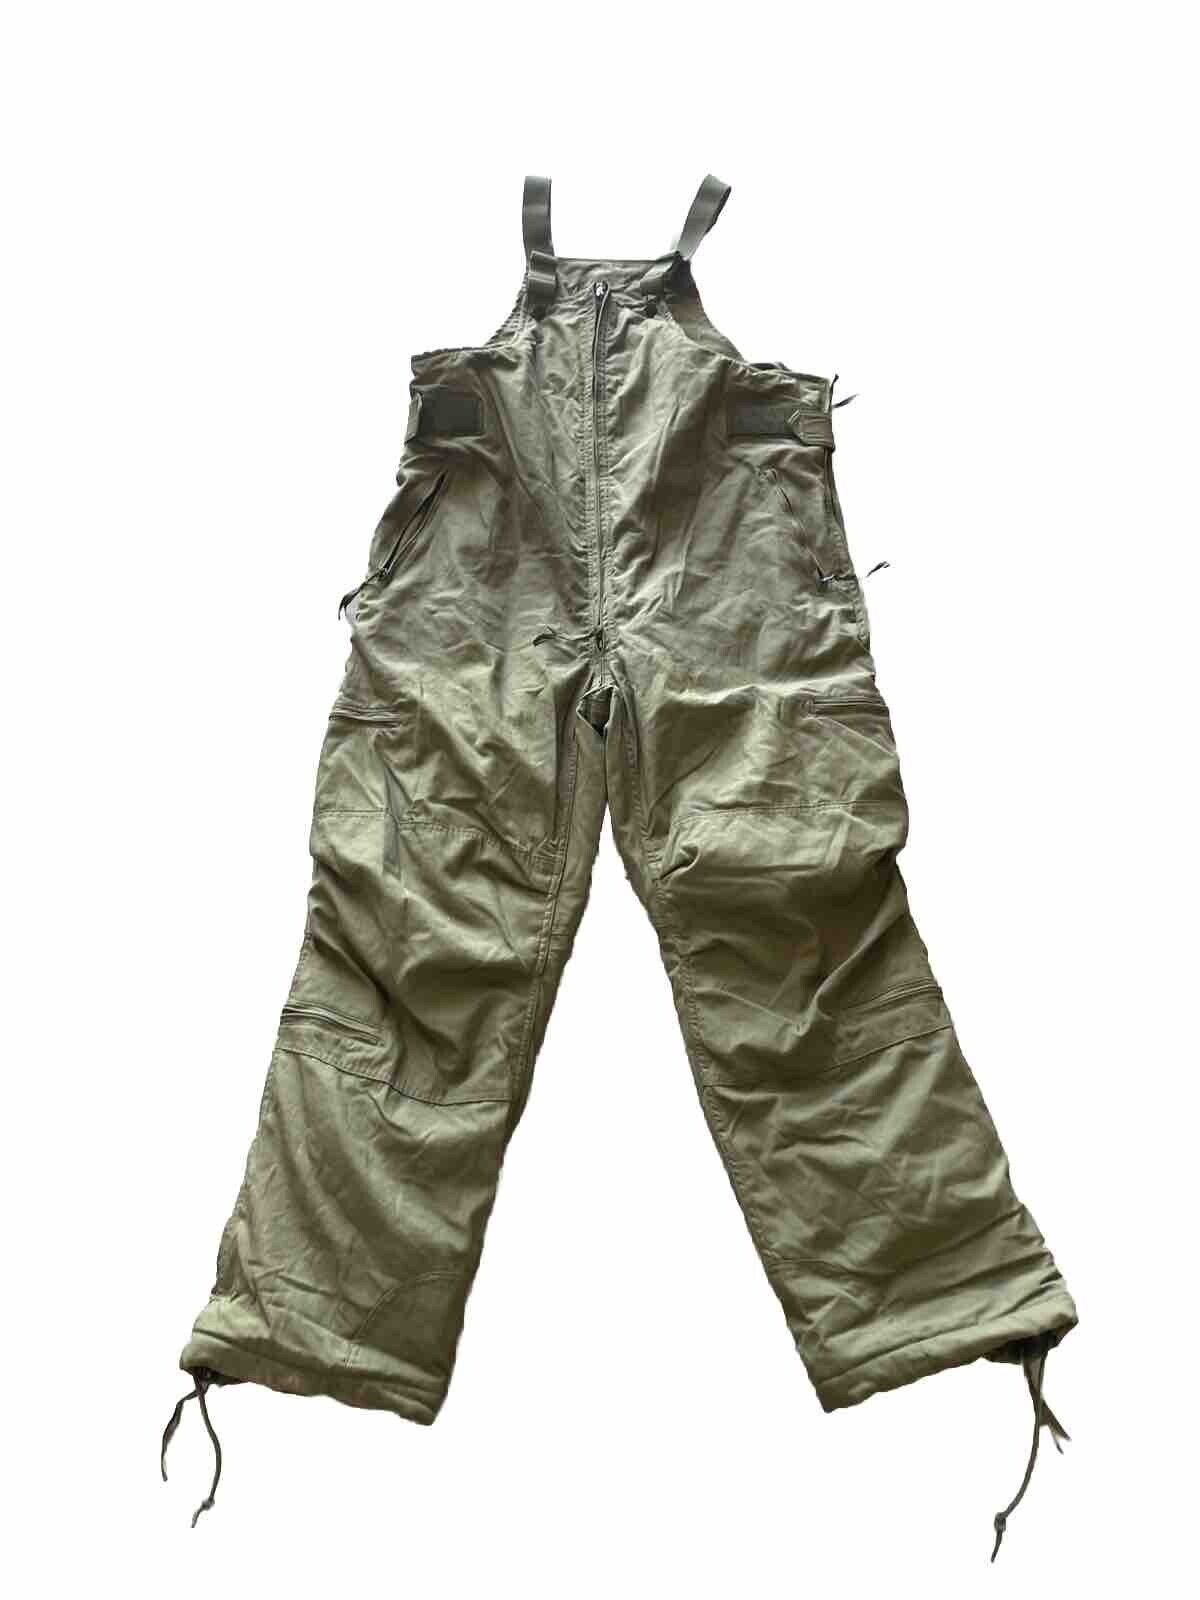 Military Cold Weather Overalls Large Long New No Tags